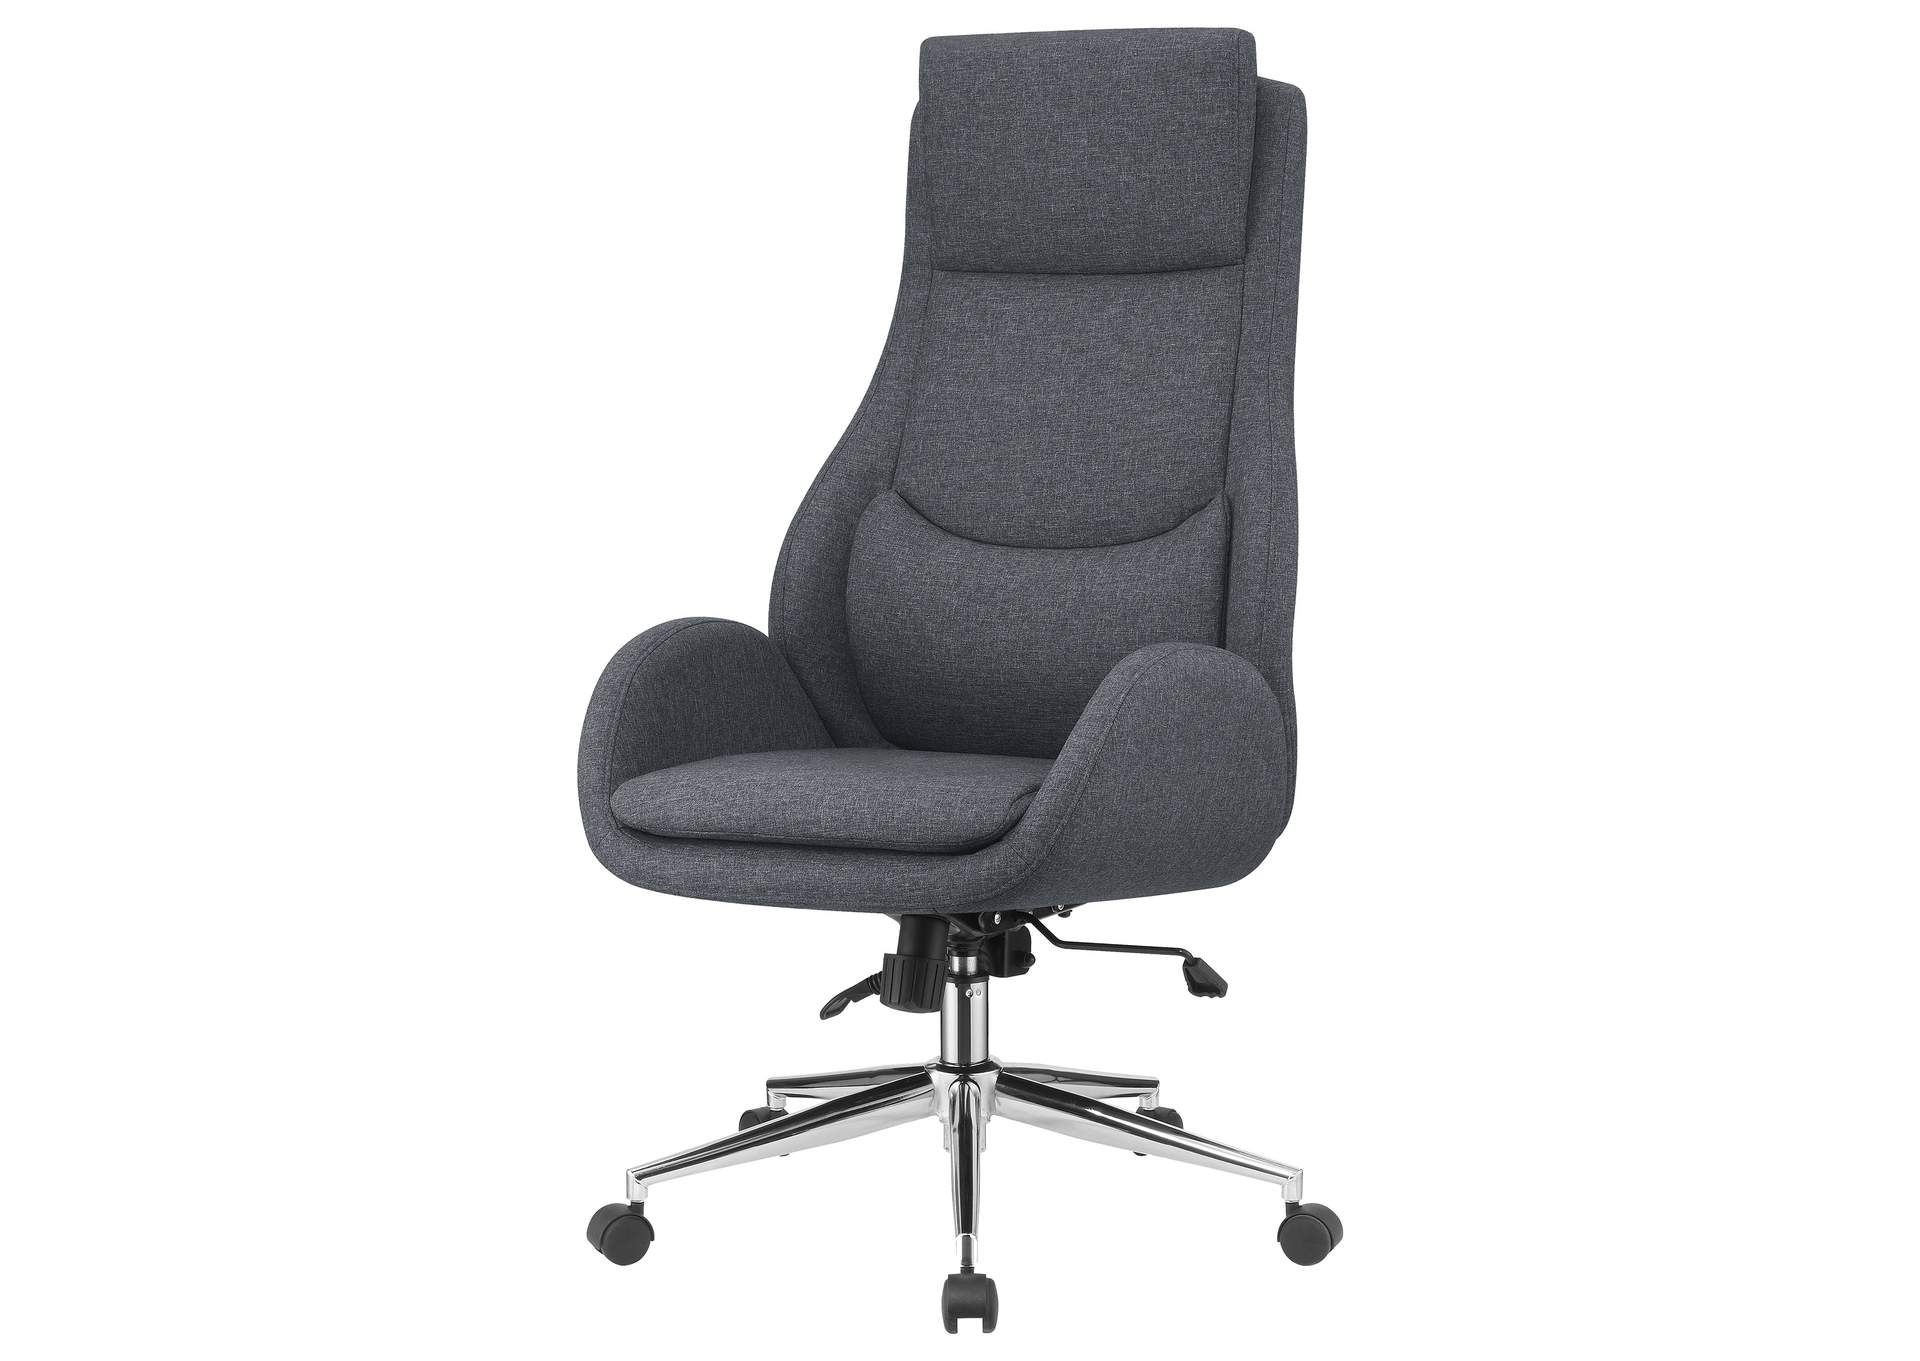 Cruz Upholstered Office Chair with Padded Seat Grey and Chrome,Coaster Furniture